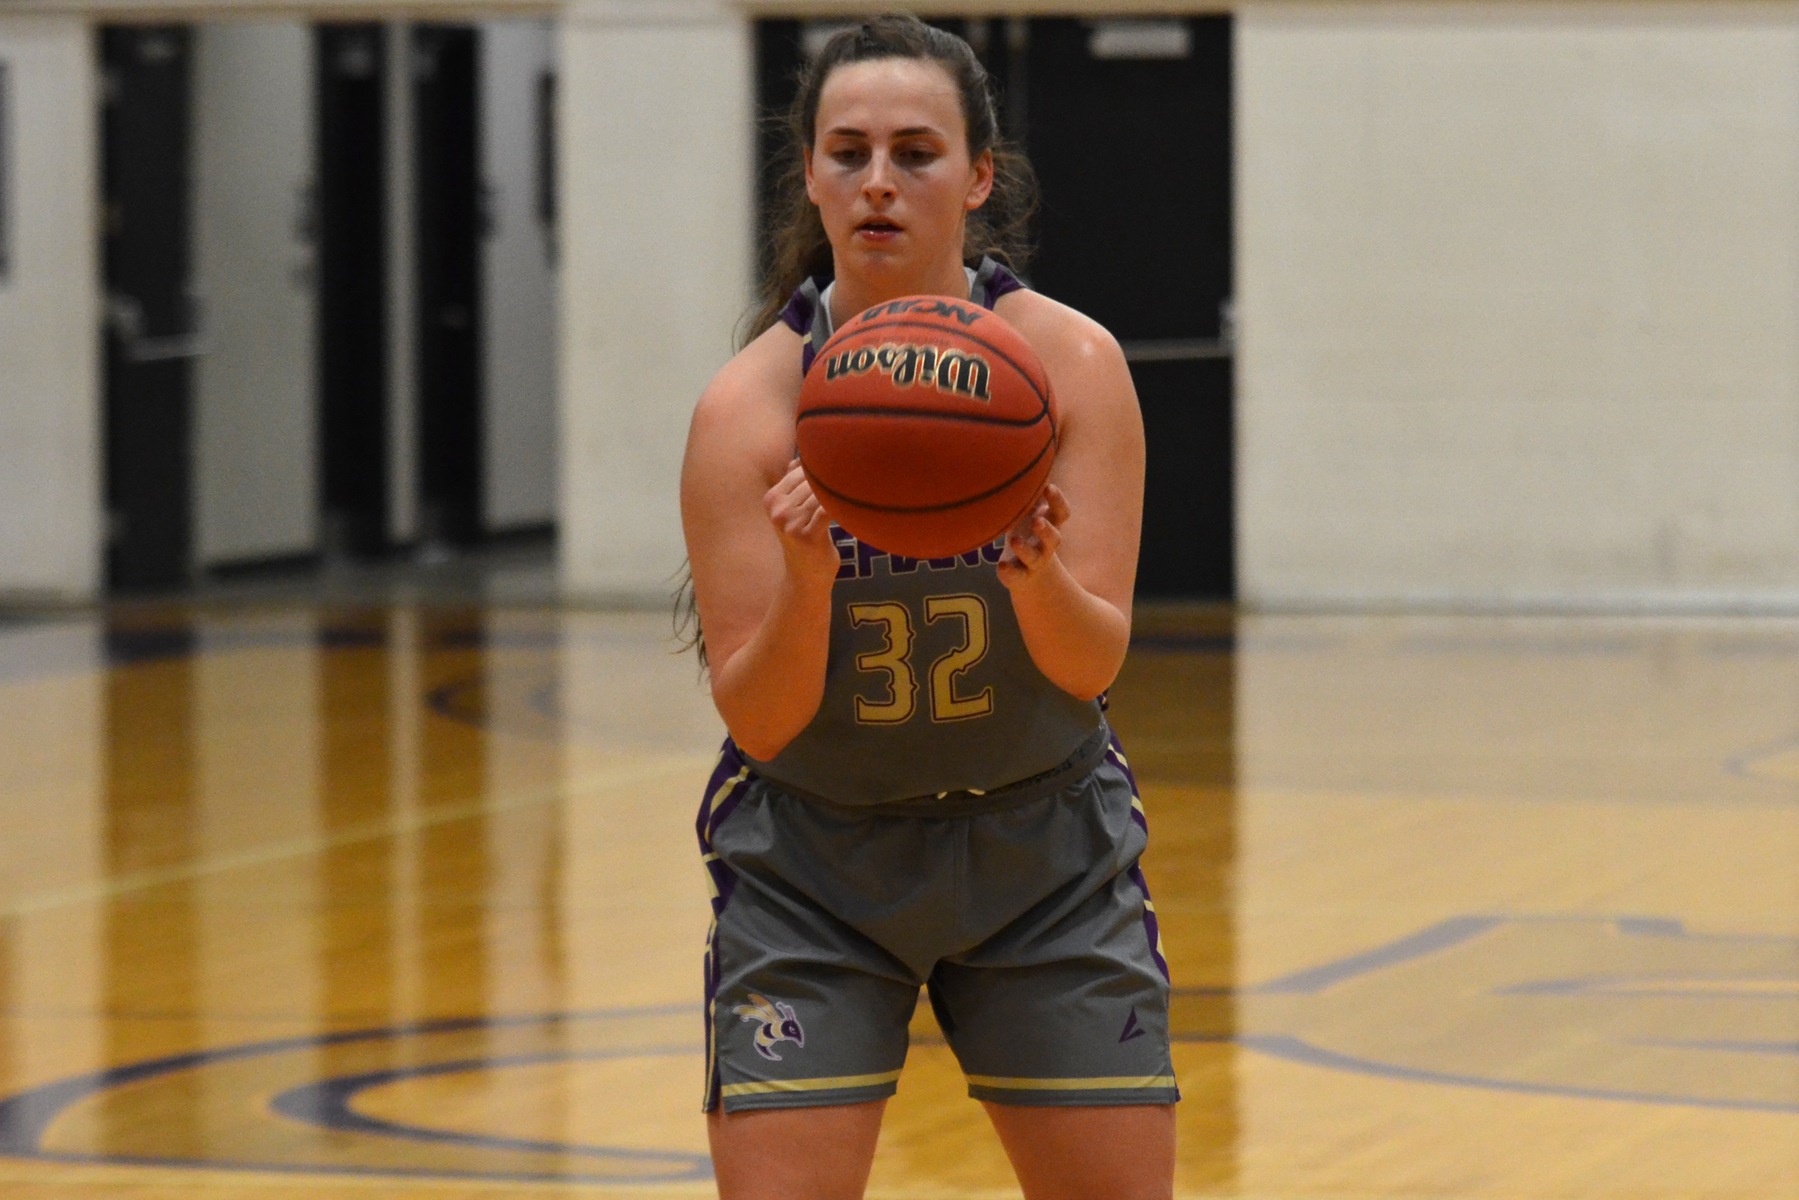 Women’s basketball season ends with conference loss at Franklin